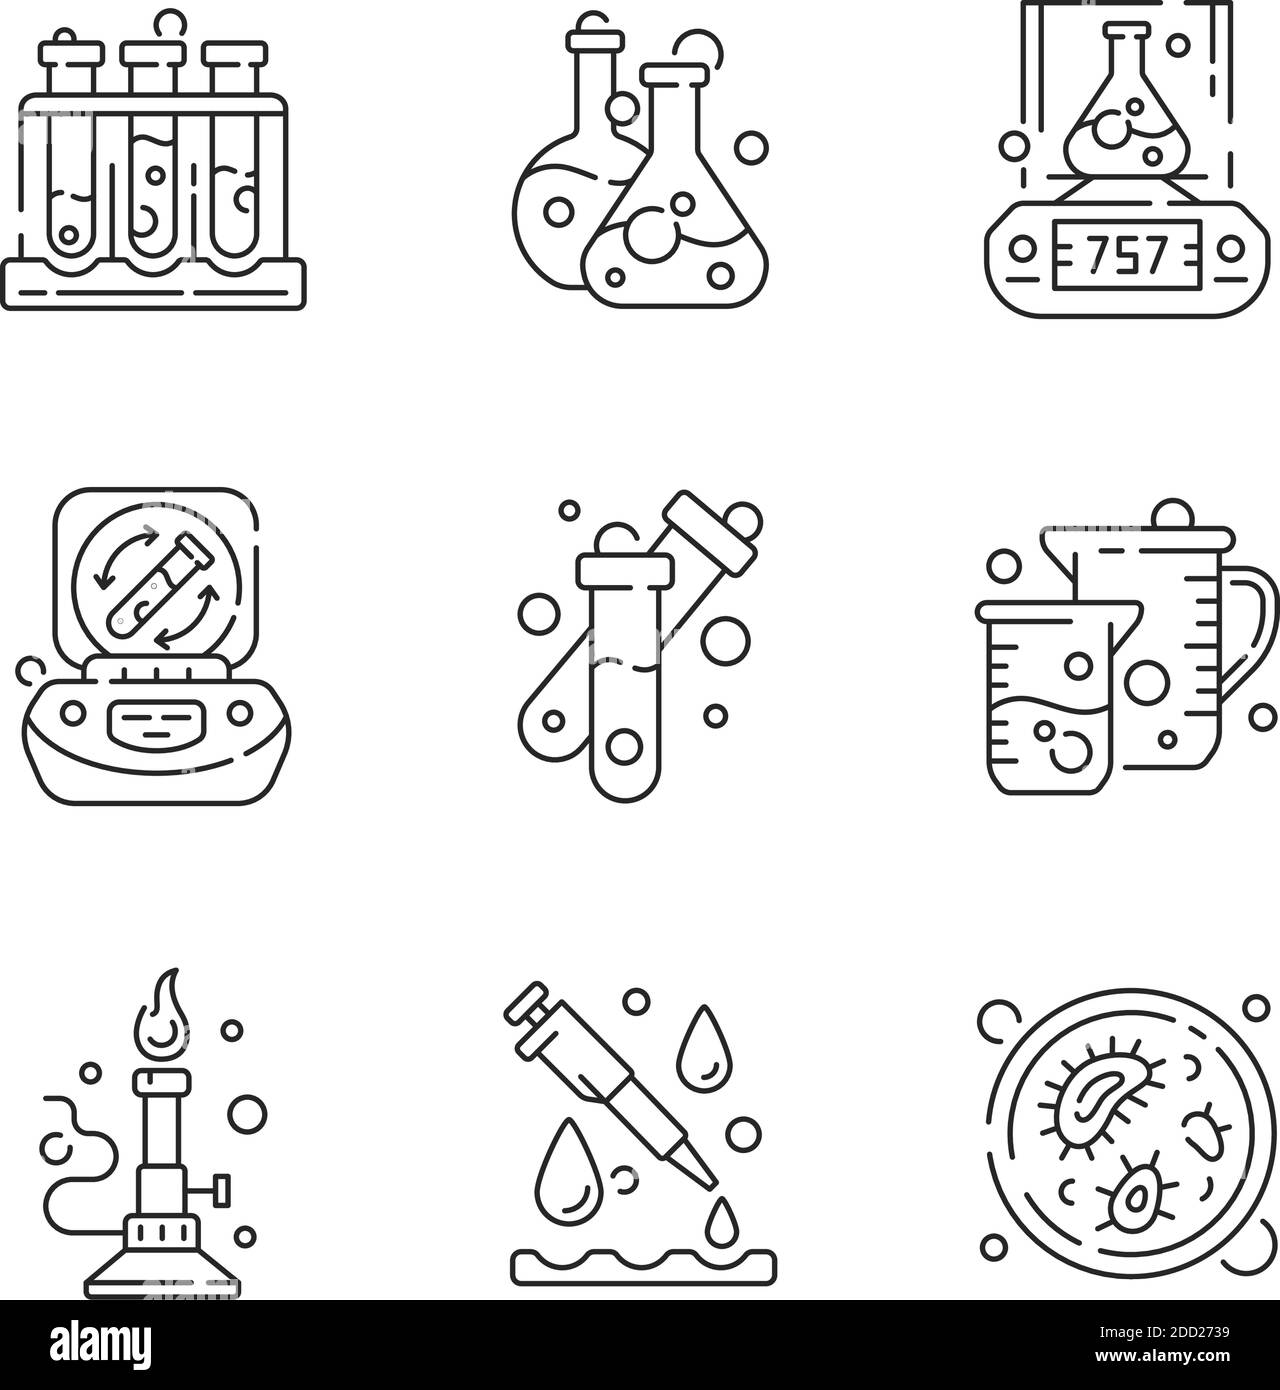 Line Icons Of Laboratory Instruments And Equipment, Scientific